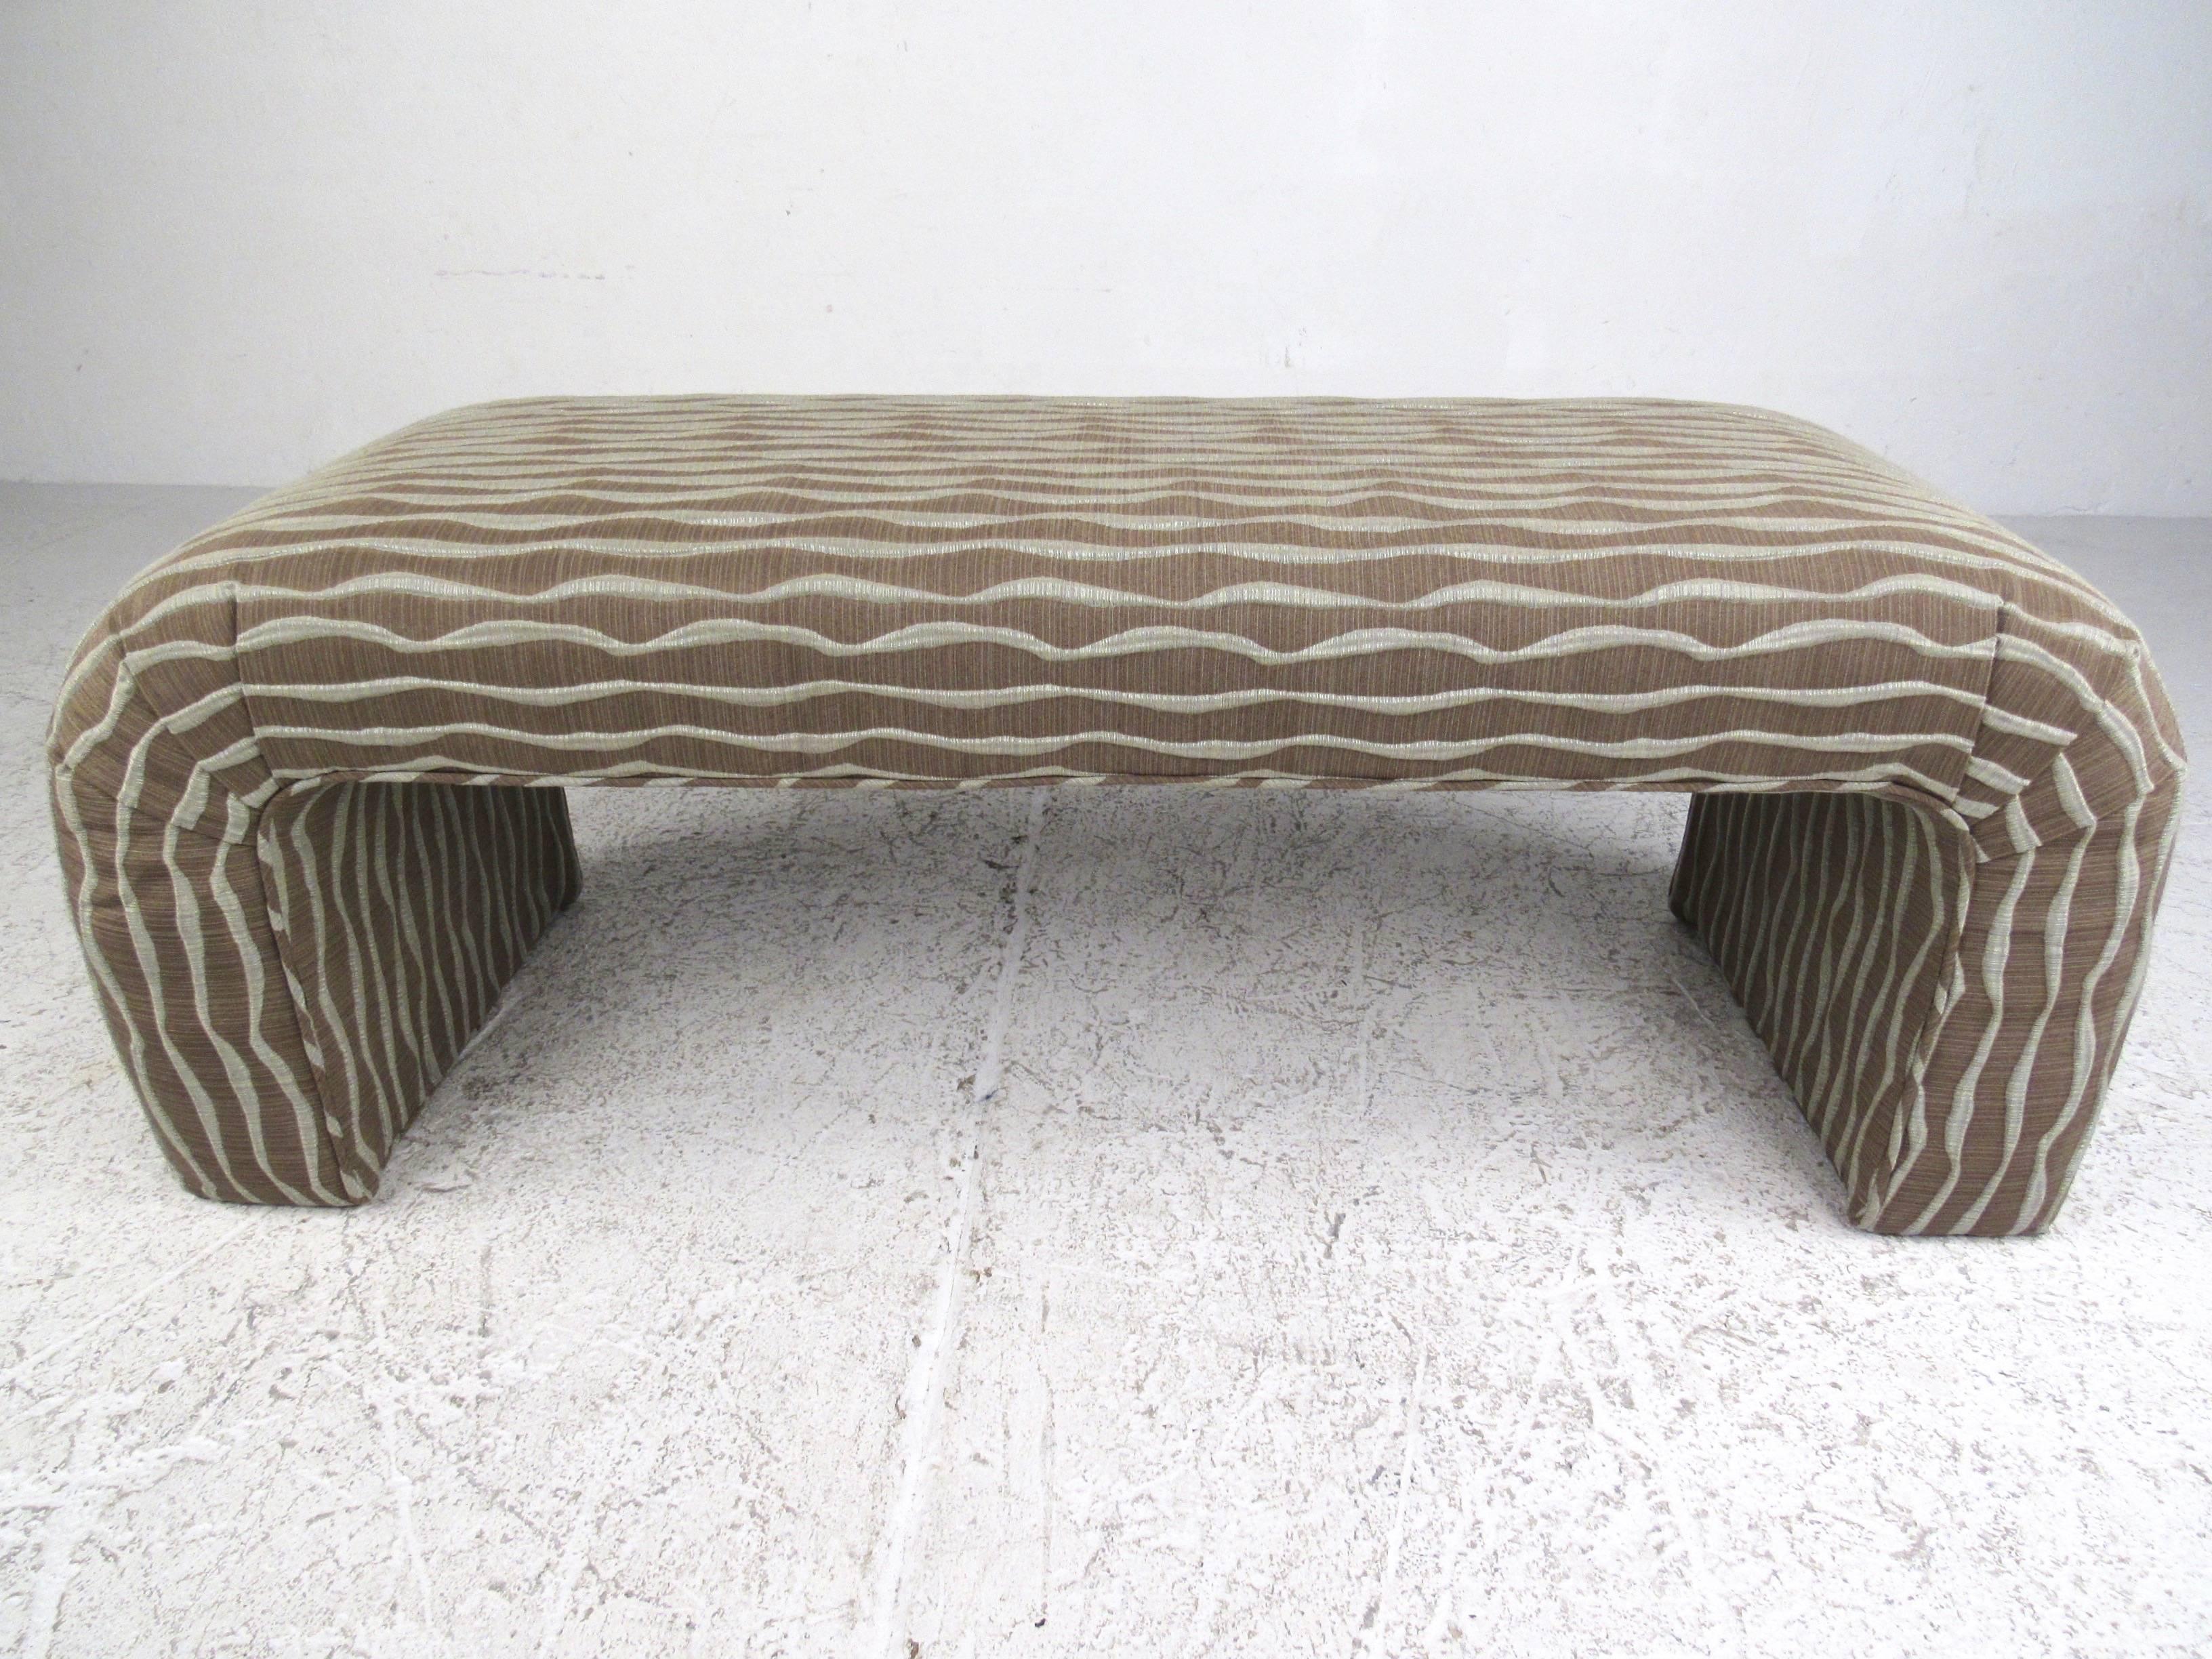 This stylish upholstered window bench is the perfect size for occasional seating in any setting. Unique textured upholstery add some pop to this simple rounded edge bench. This posting is for one bench, one currently available. Please confirm item